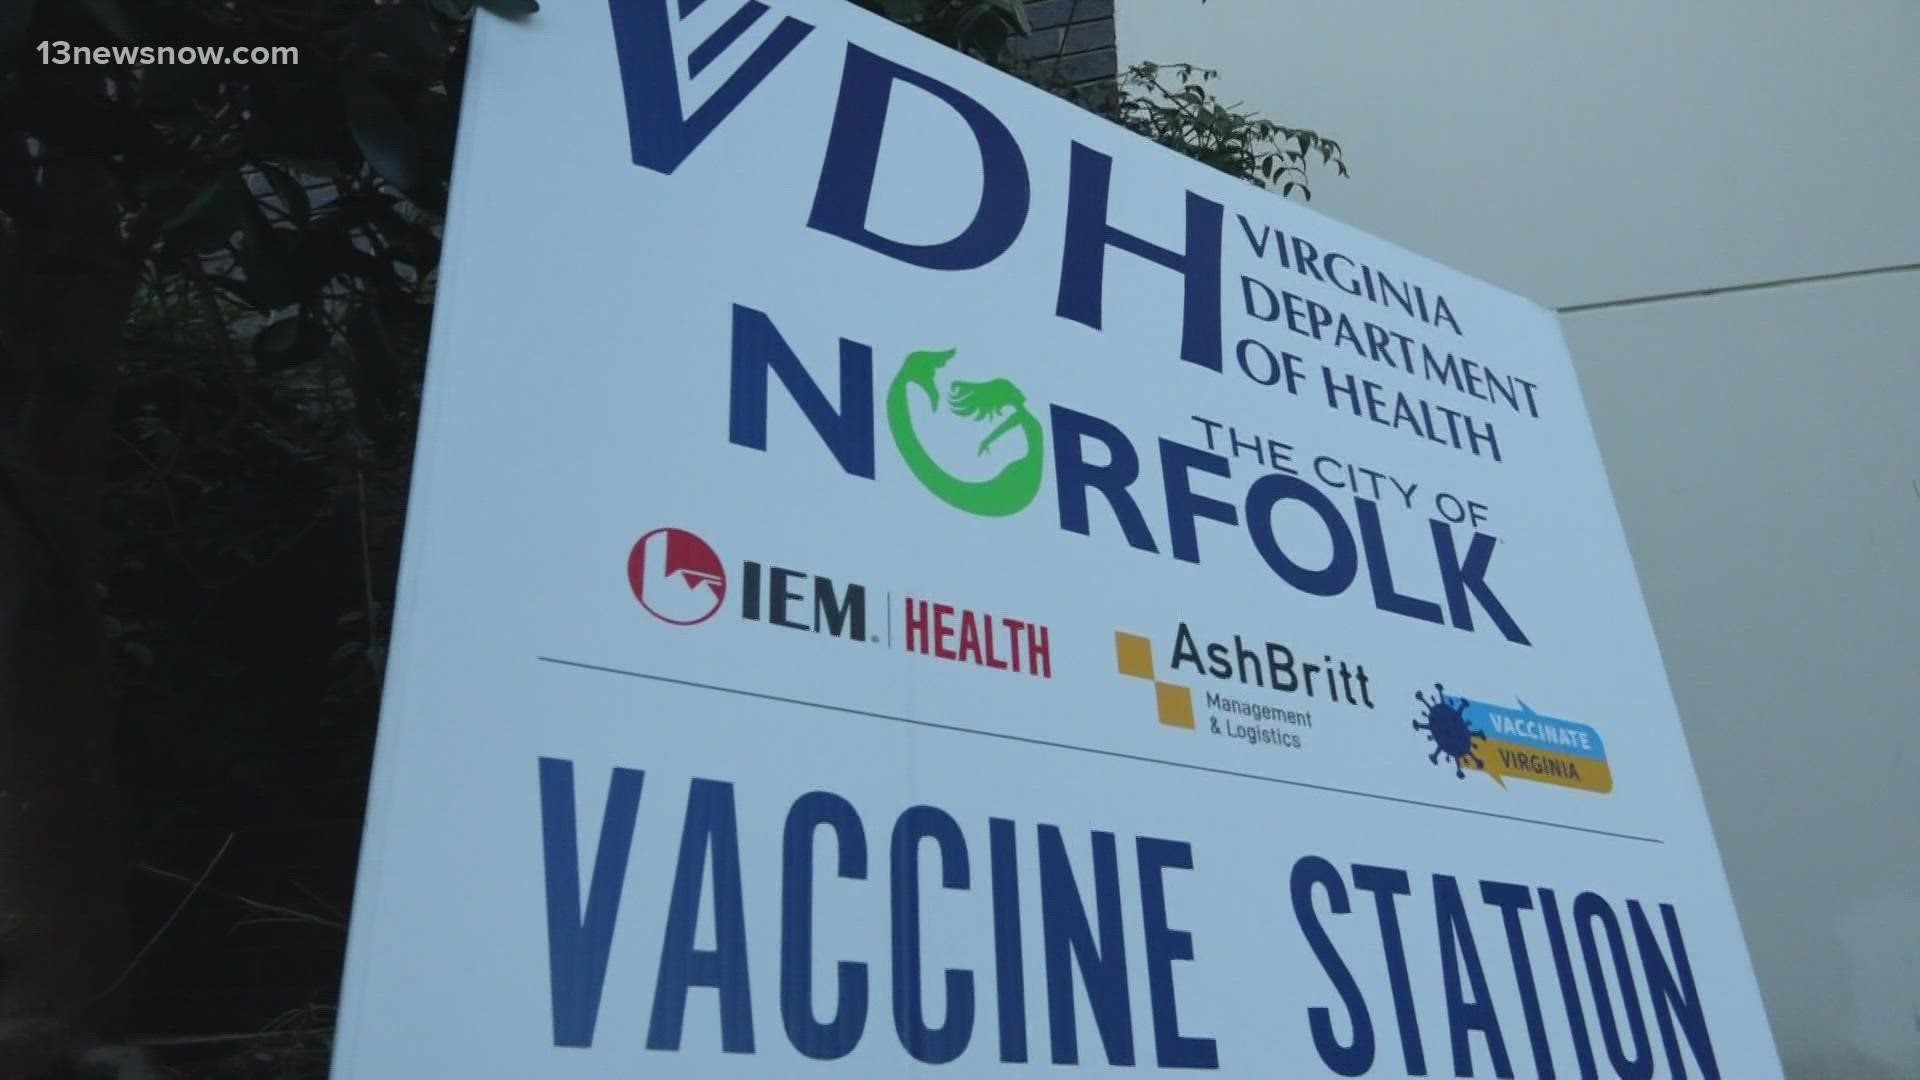 Leaders with the Virginia Department of Health said fewer and fewer people are signing up for vaccines. The clinic is shrinking a bit.